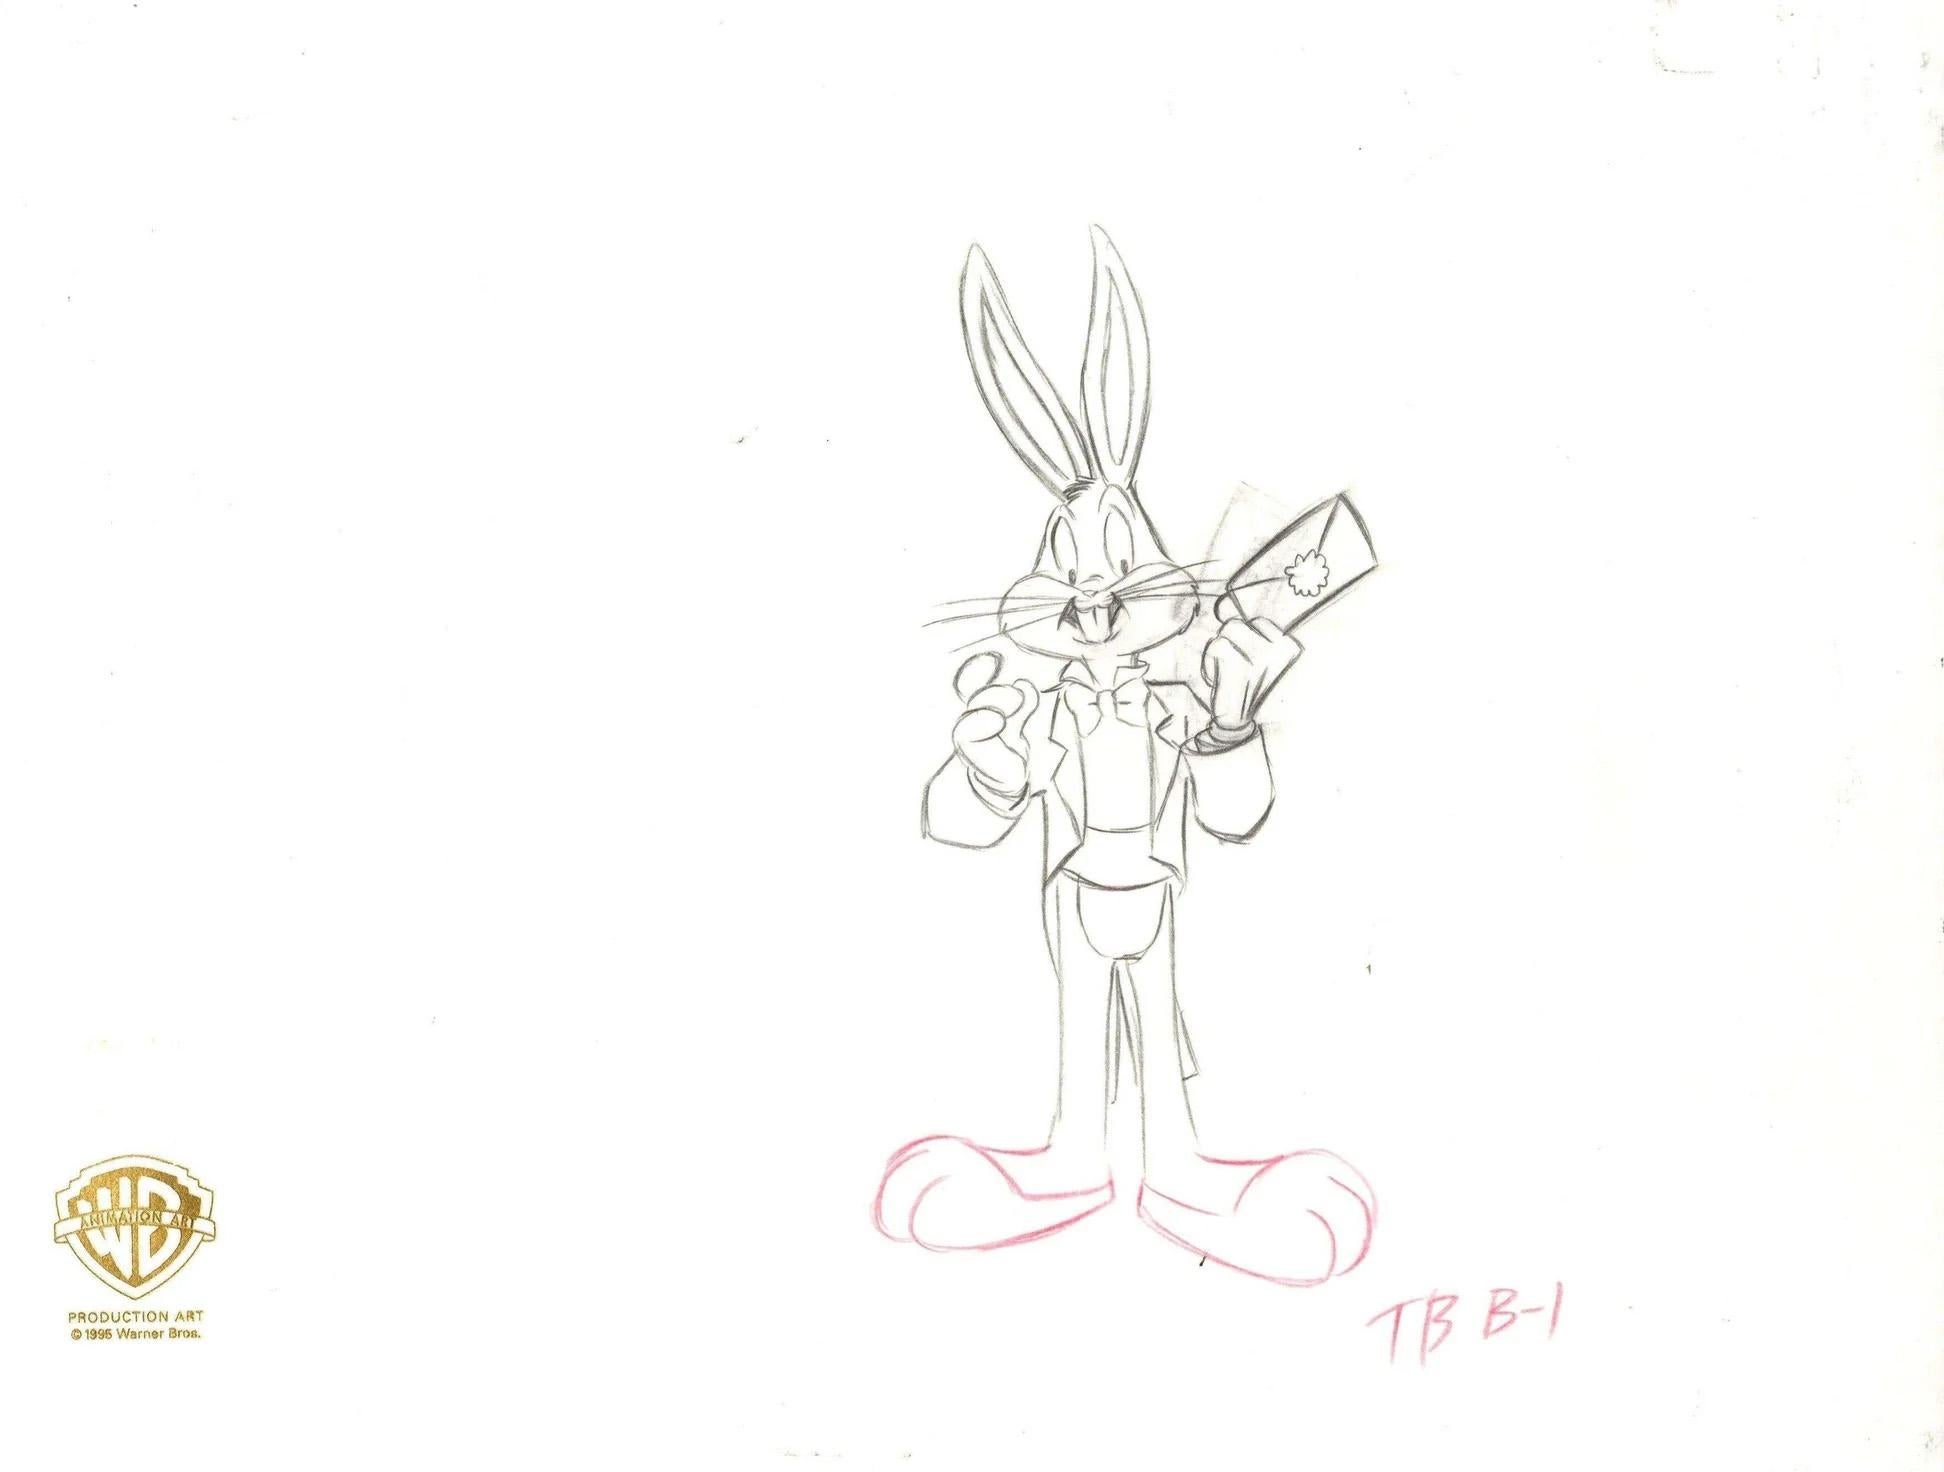 Looney Tunes Original Production Drawing: Bugs Bunny - Art by Looney Tunes Studio Artists